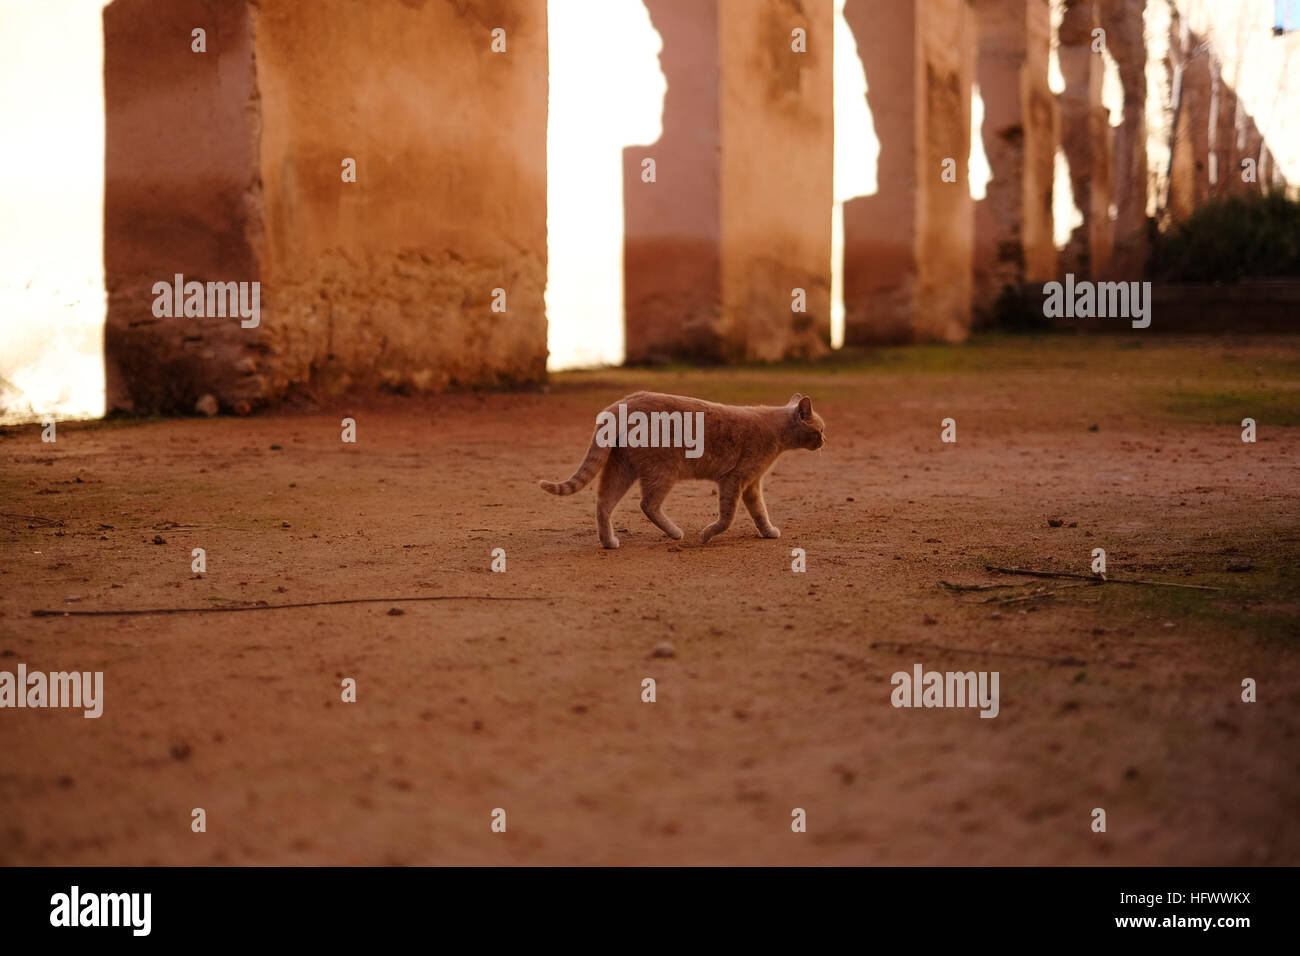 A cat walks through the stone archways in the Royal Stables of the Imperial Palace in Meknez, Morocco. Stock Photo